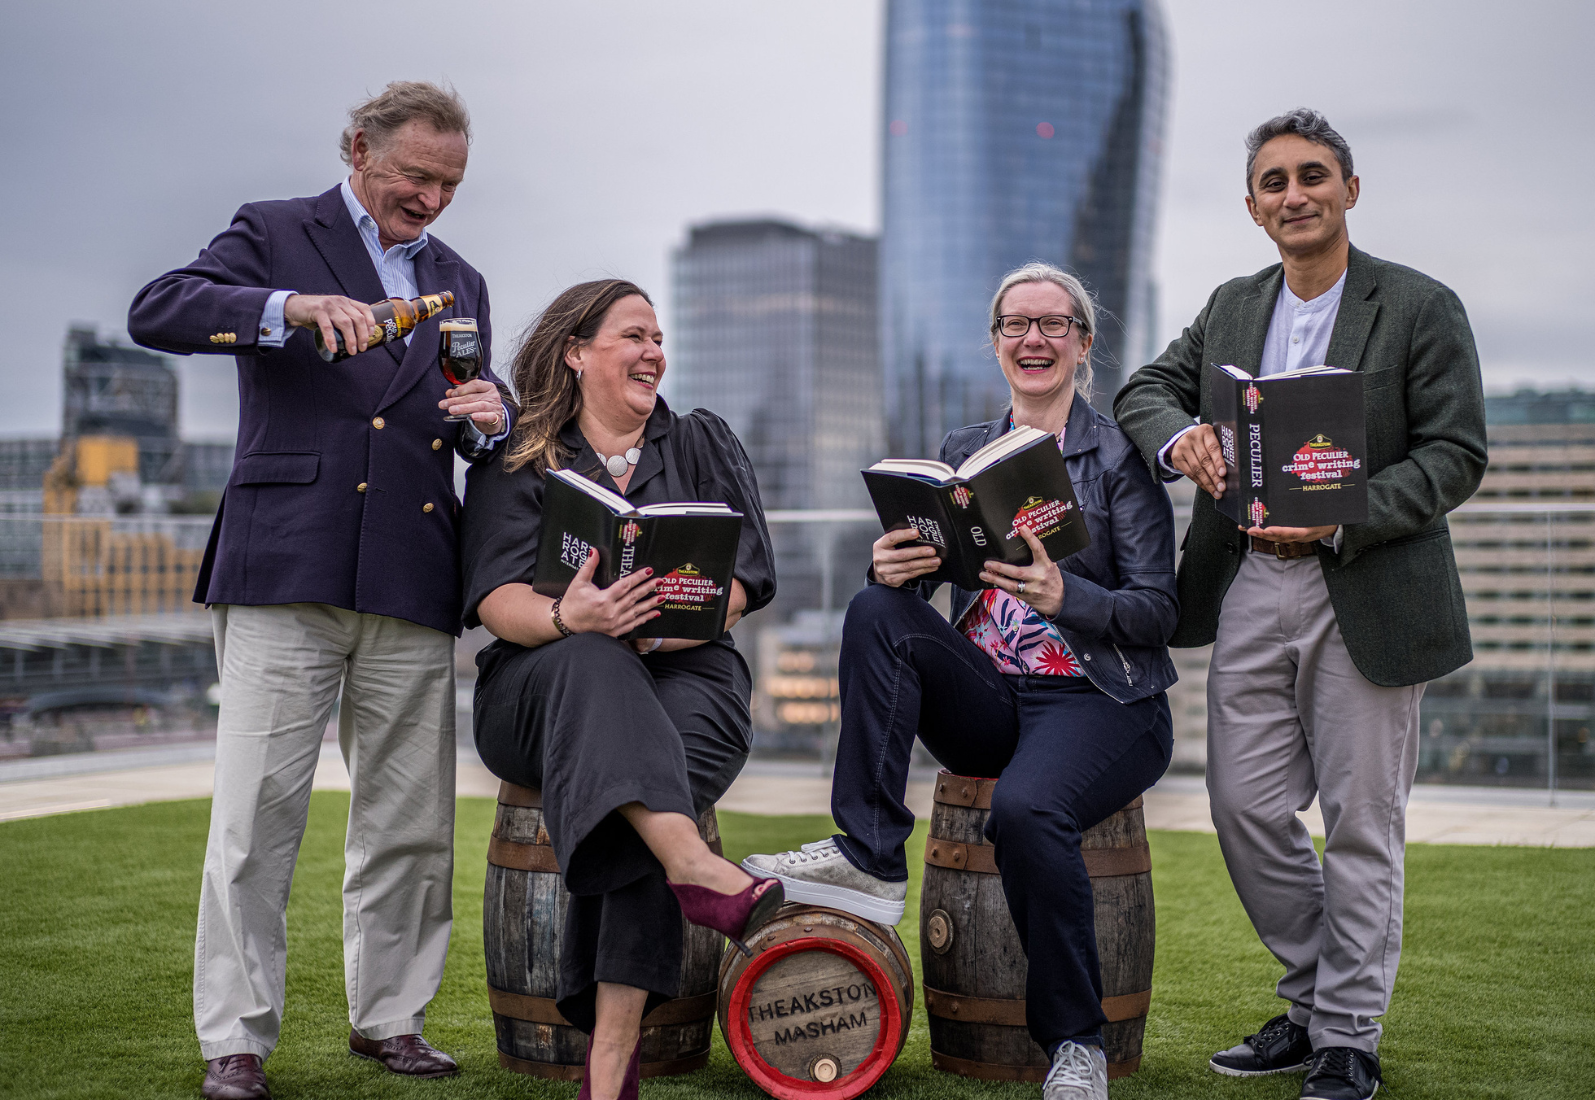 The THeakstons Old Pecuulier Crime Writing Festival Launch